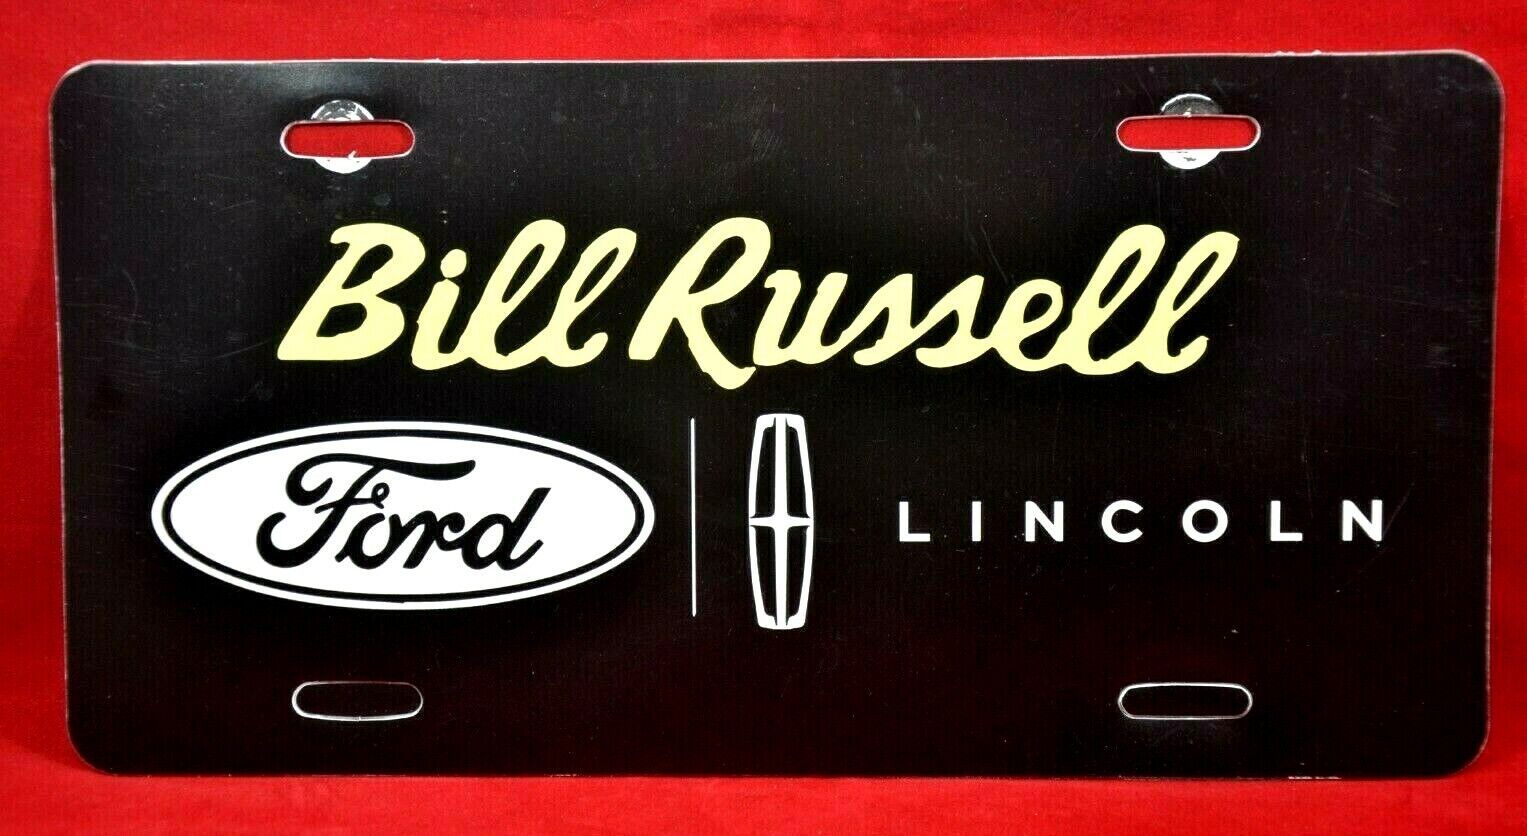 Bill Russell Ford  Lincoln Booster License Plate Very Good  Condition